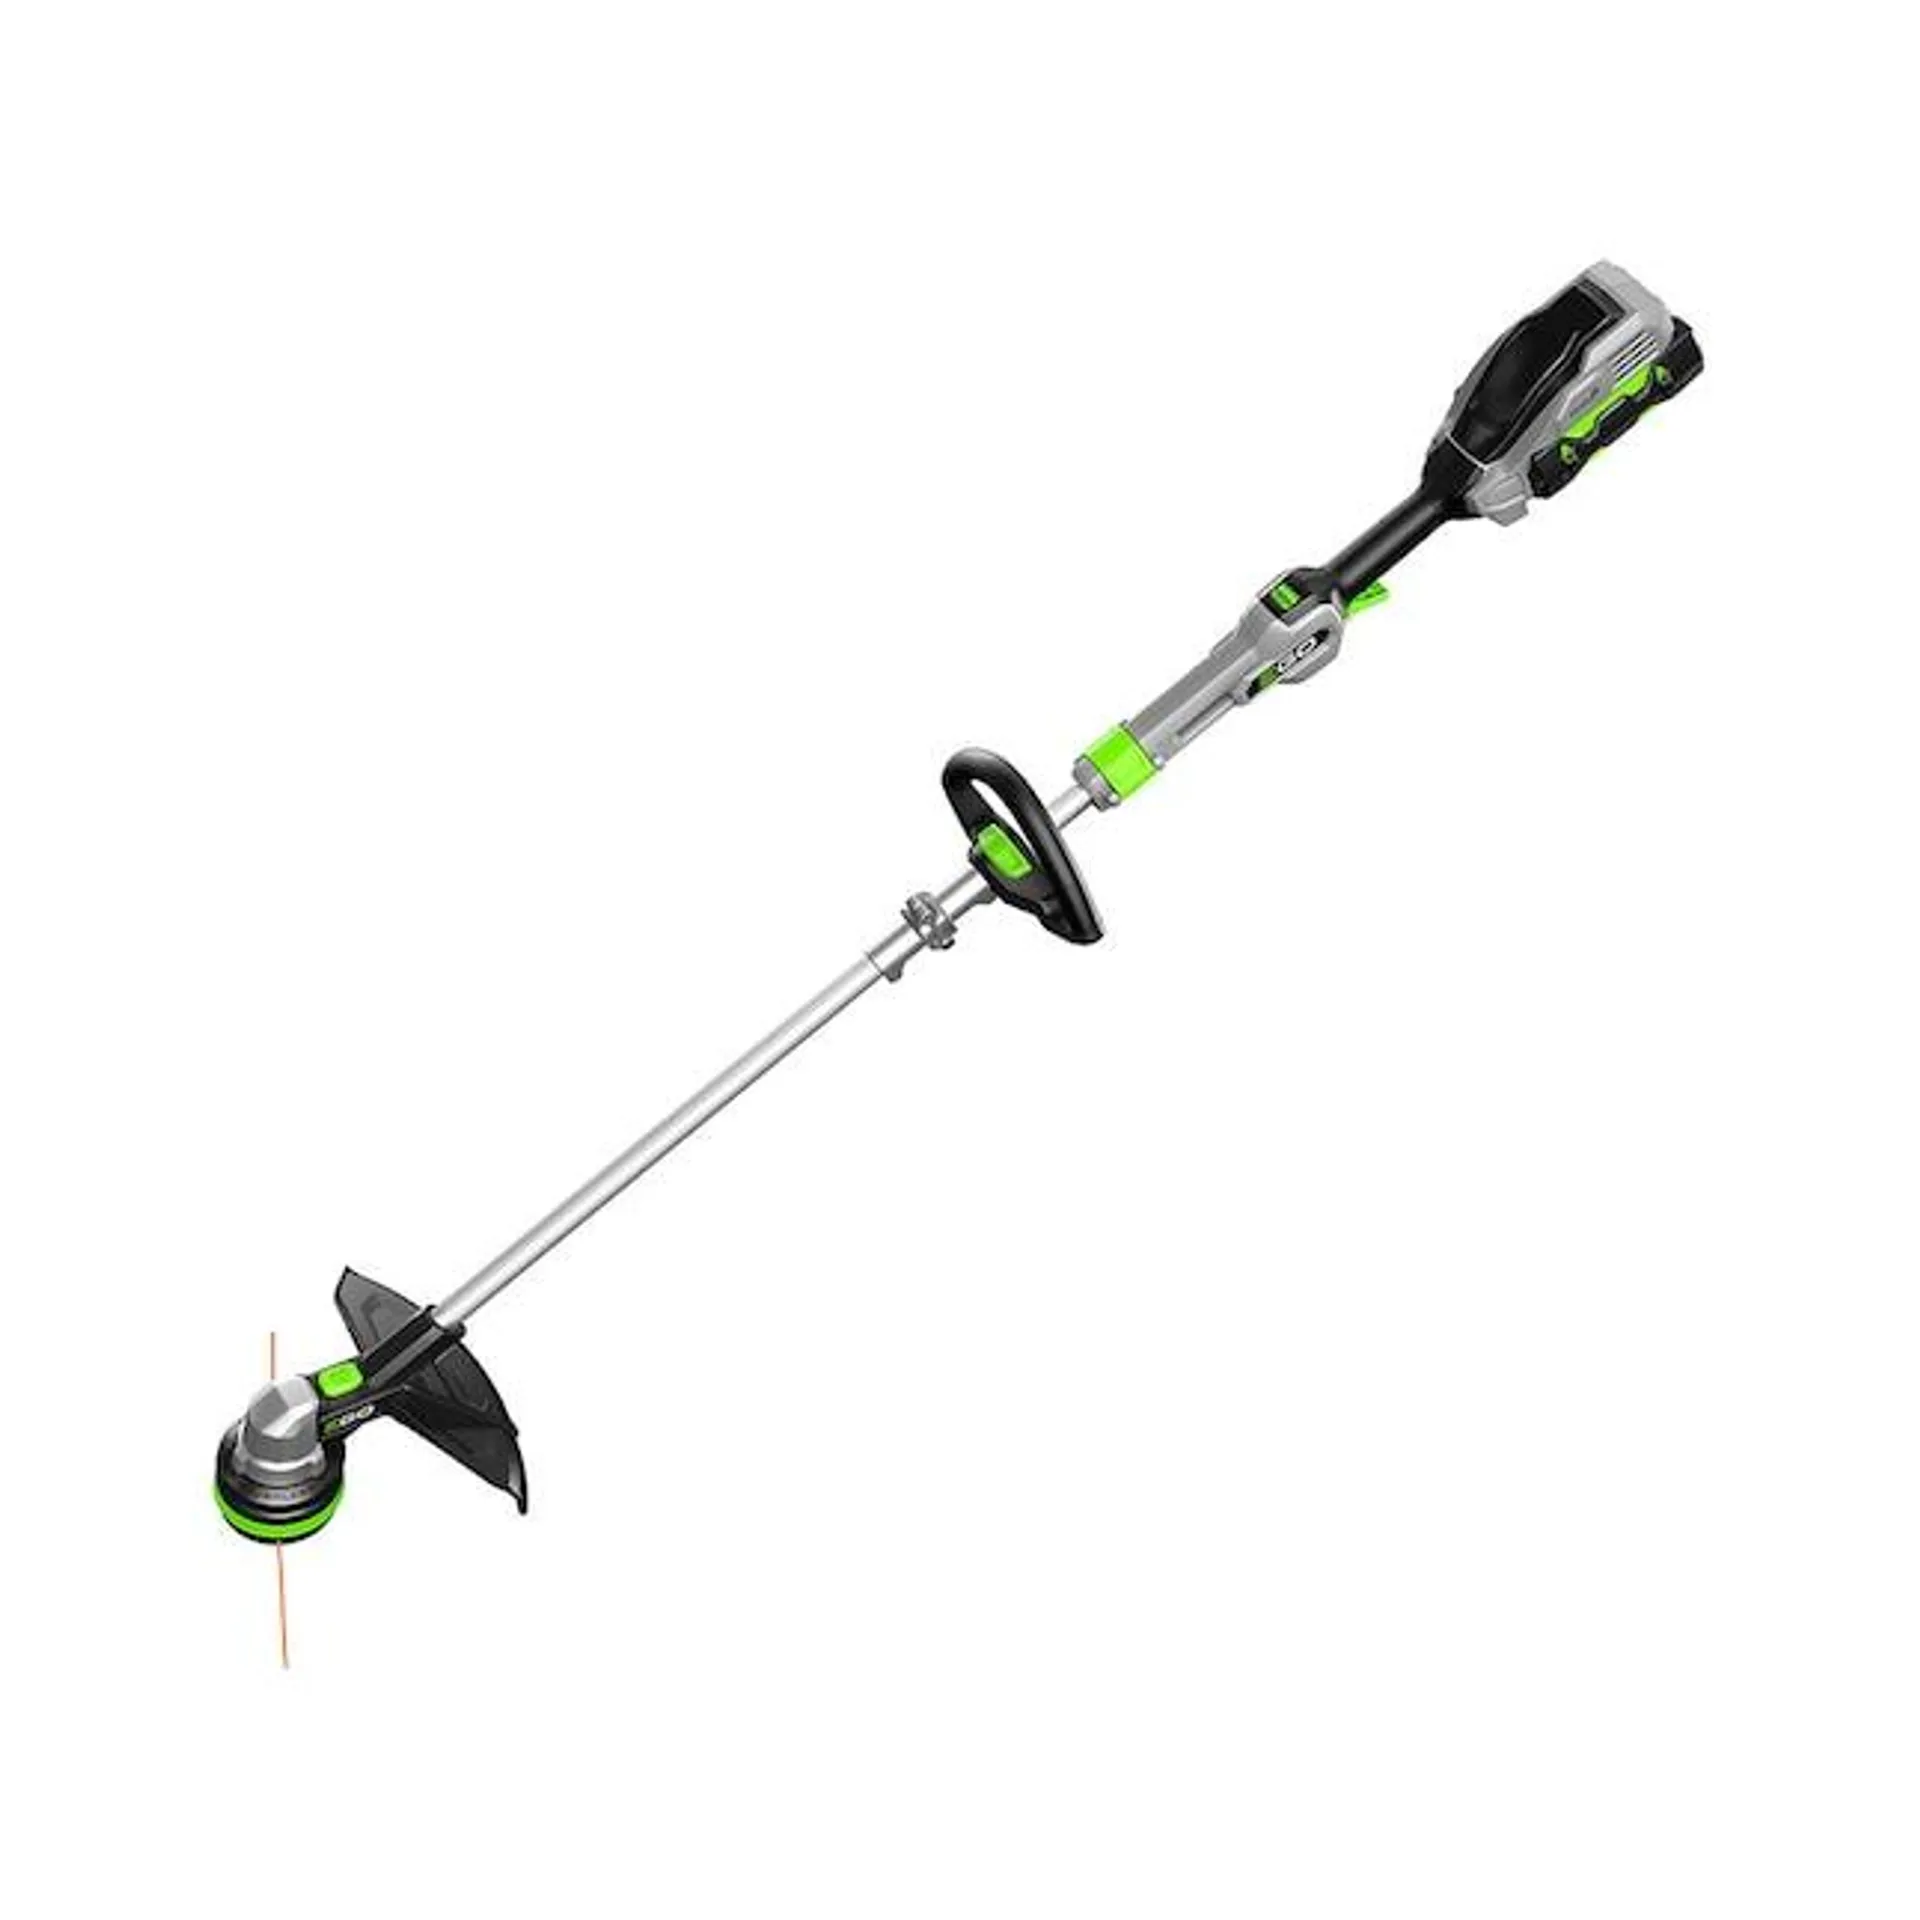 EGO POWERLOAD 56-volt 15-in Telescopic Shaft Battery String Trimmer 2.5 Ah (Battery and Charger Included)